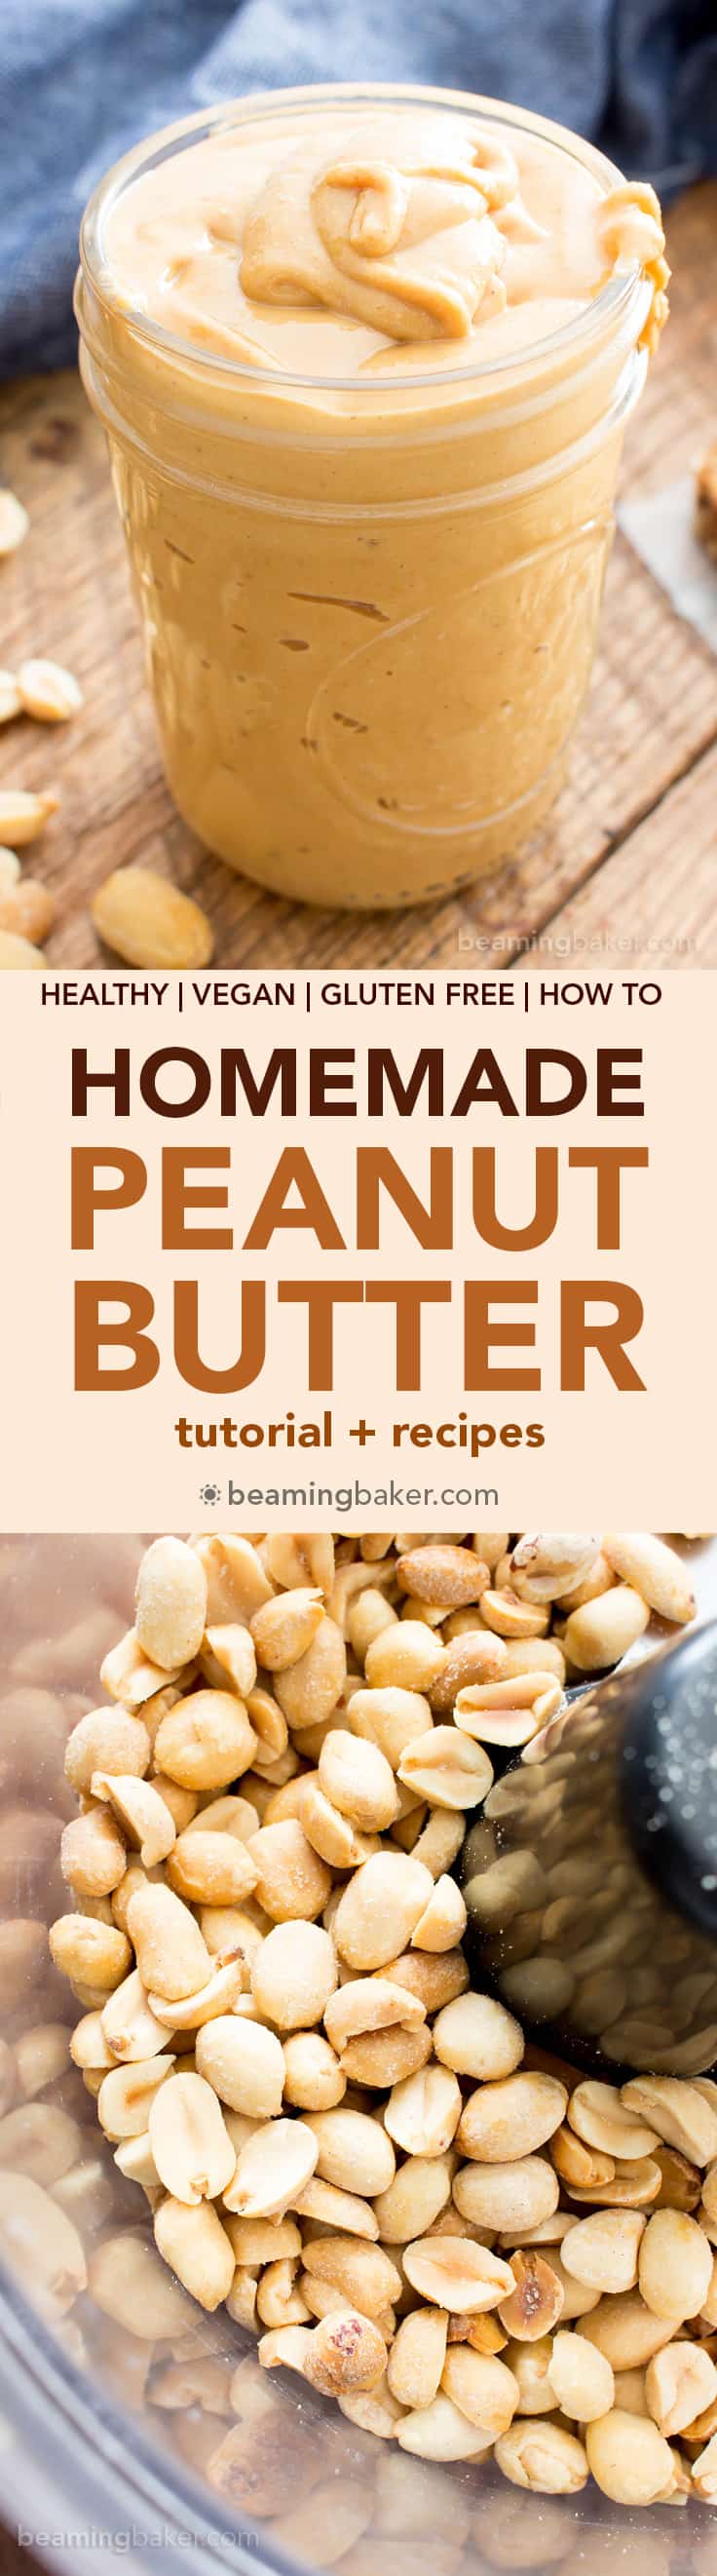 How to Make Homemade Peanut Butter: a step-by-step tutorial and video guide on how to make smooth, creamy homemade peanut butter. #Vegan #GlutenFree #DairyFree #DIY #Homemade | Recipe on BeamingBaker.com